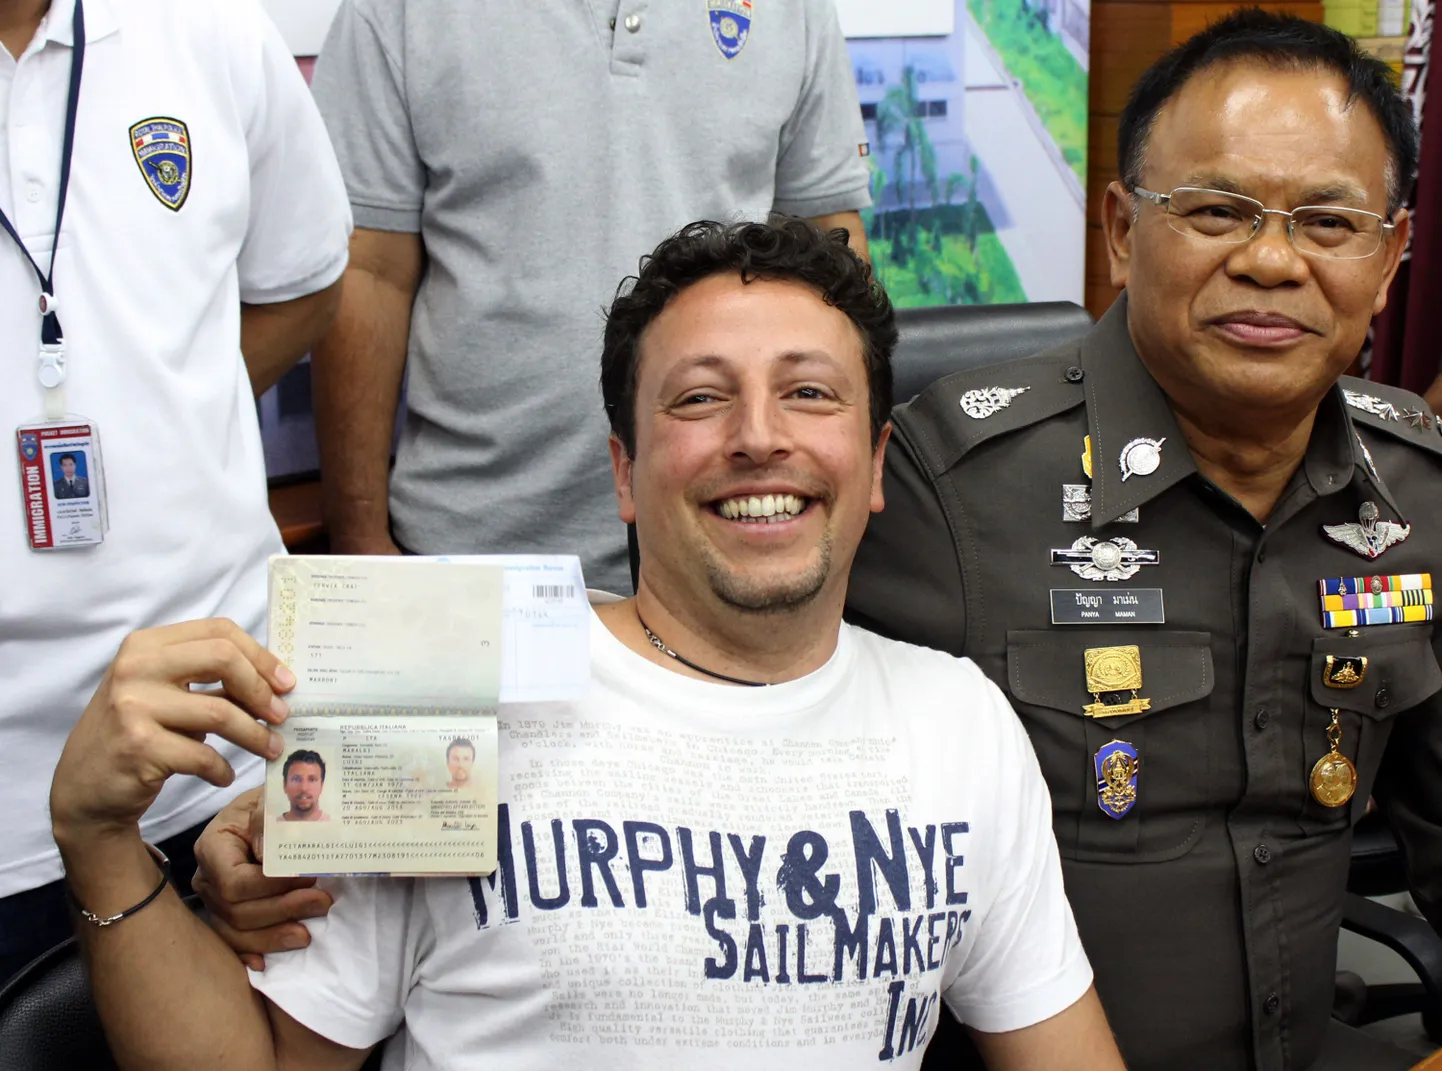 Italian Luigi Maraldi, left, whose stolen passport was used by a passenger boarding a missing Malaysian airliner, shows his passport as he reports himself to Thai police Lt. Gen. Panya Mamen, right, at Phuket police station in Phuket province, southern Thailand Sunday, March 9, 2014.   Maraldi spoke at a police news conference in the Thai resort of Phuket, where he showed his current passport, which replaced the stolen one, and expressed surprise that anyone could use his old one.  (AP Photo/Krissada Muanhawang) / TT / kod 436